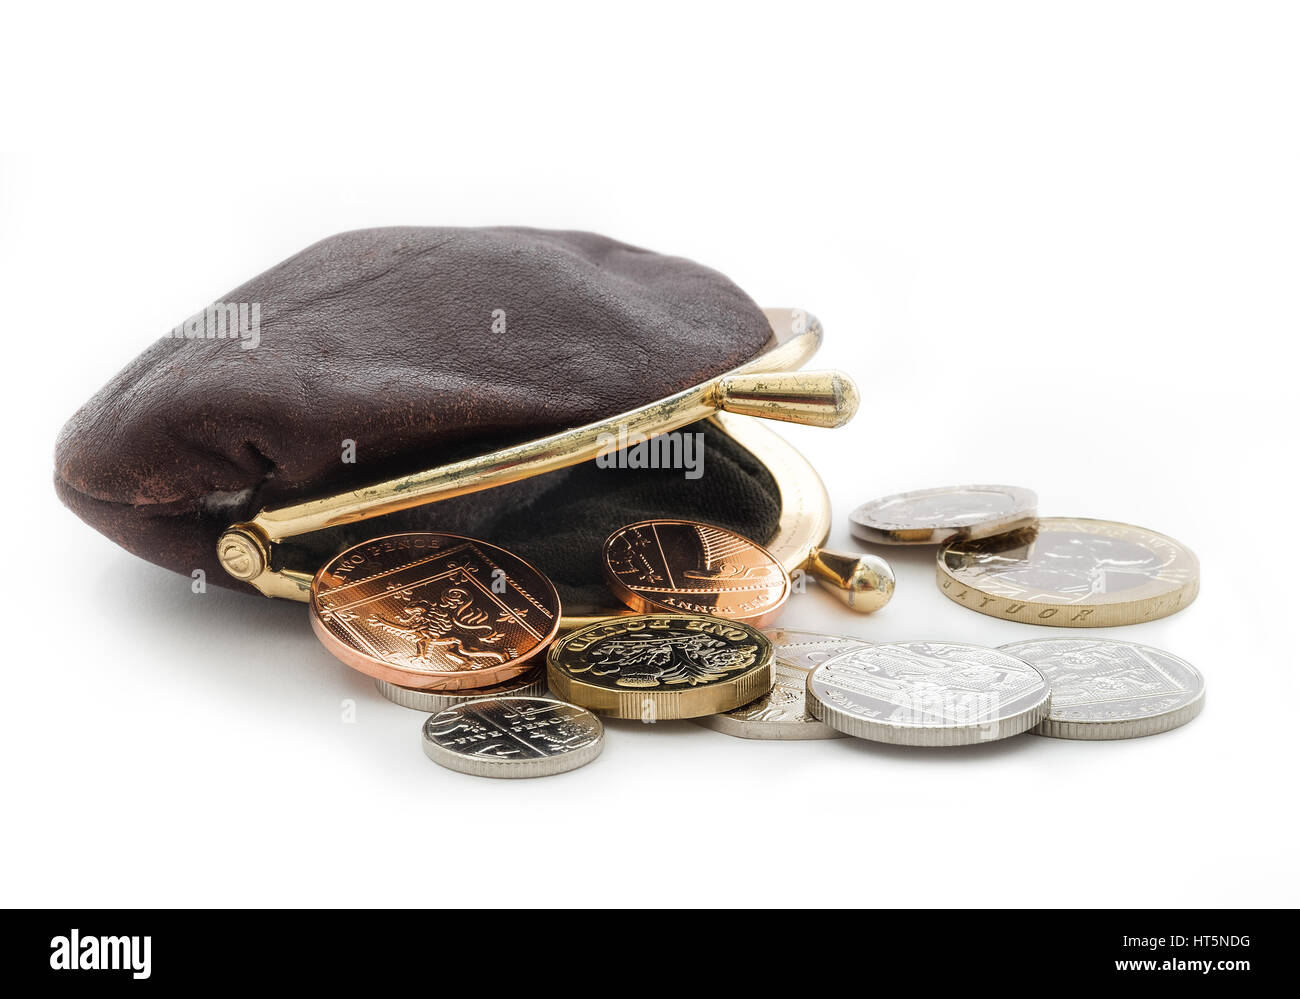 Loose change with an open purse. British coins including the new pound coin introduced in 2017. Stock Photo